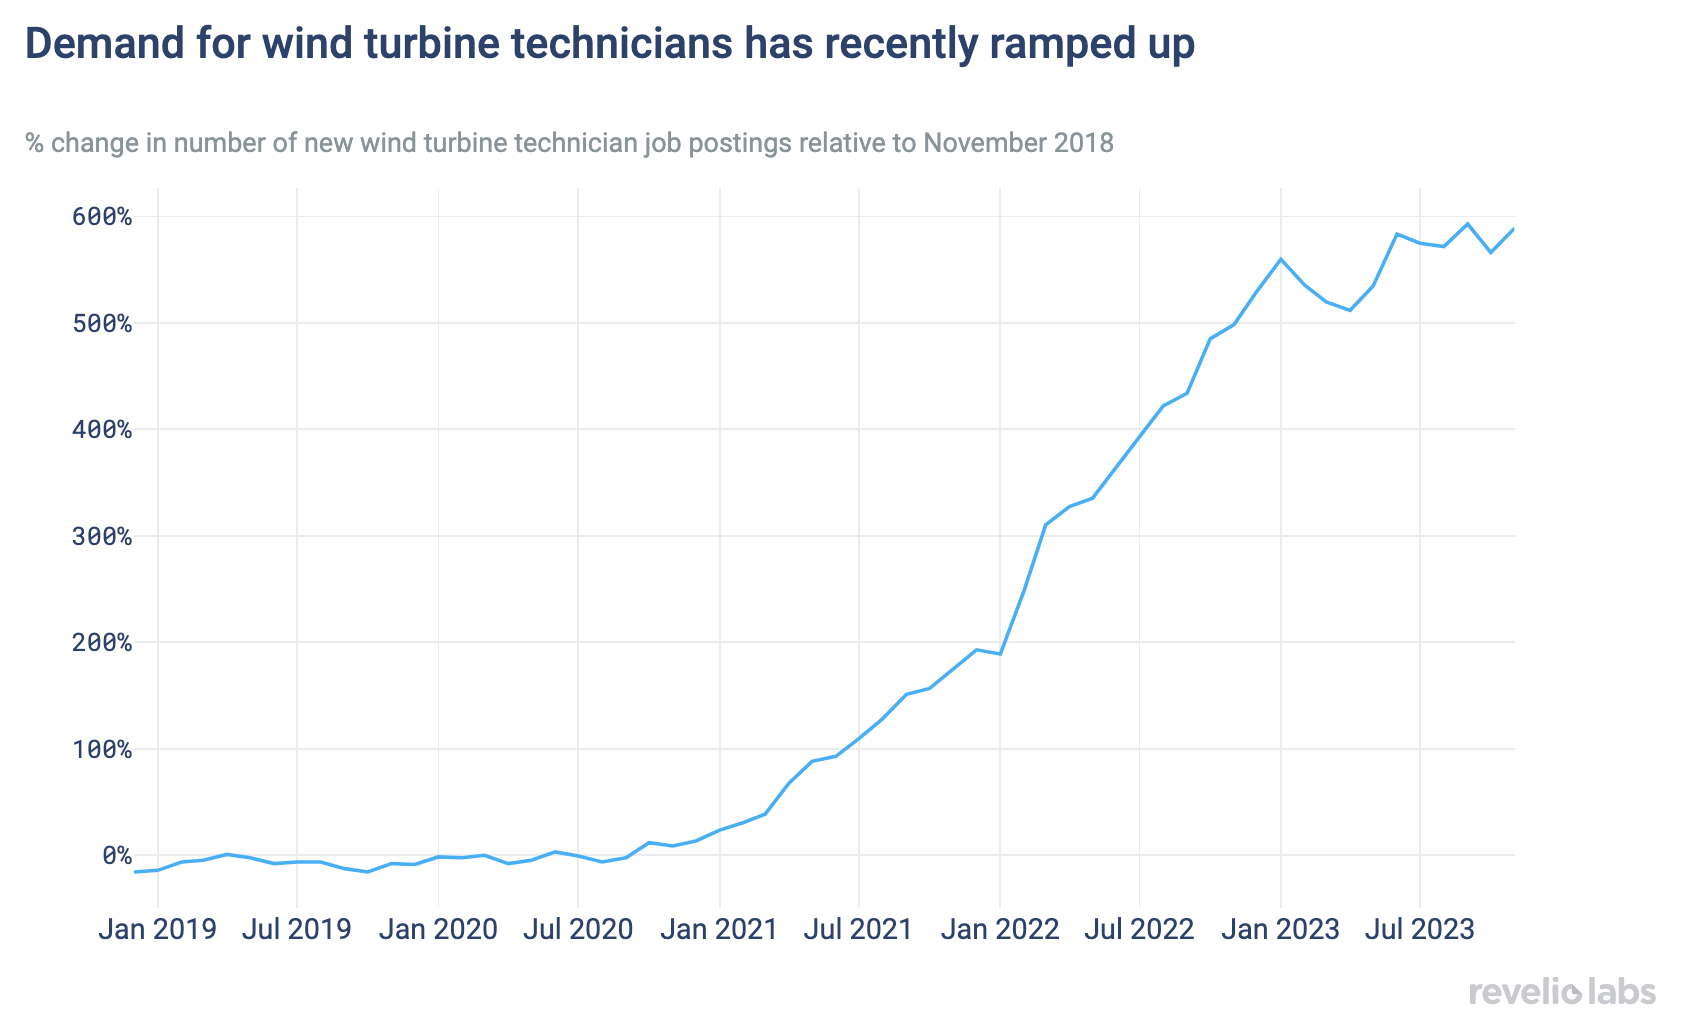 Demand for wind turbine technicians has recently ramped up